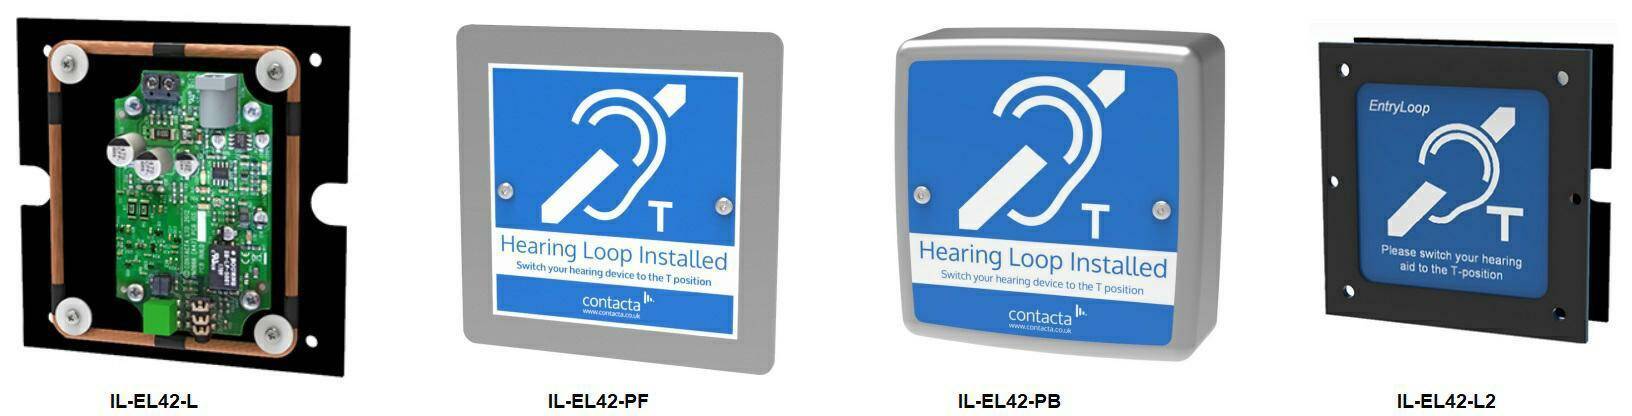 Induction loop in infokiosk - realization of improved accessibility at the office or court